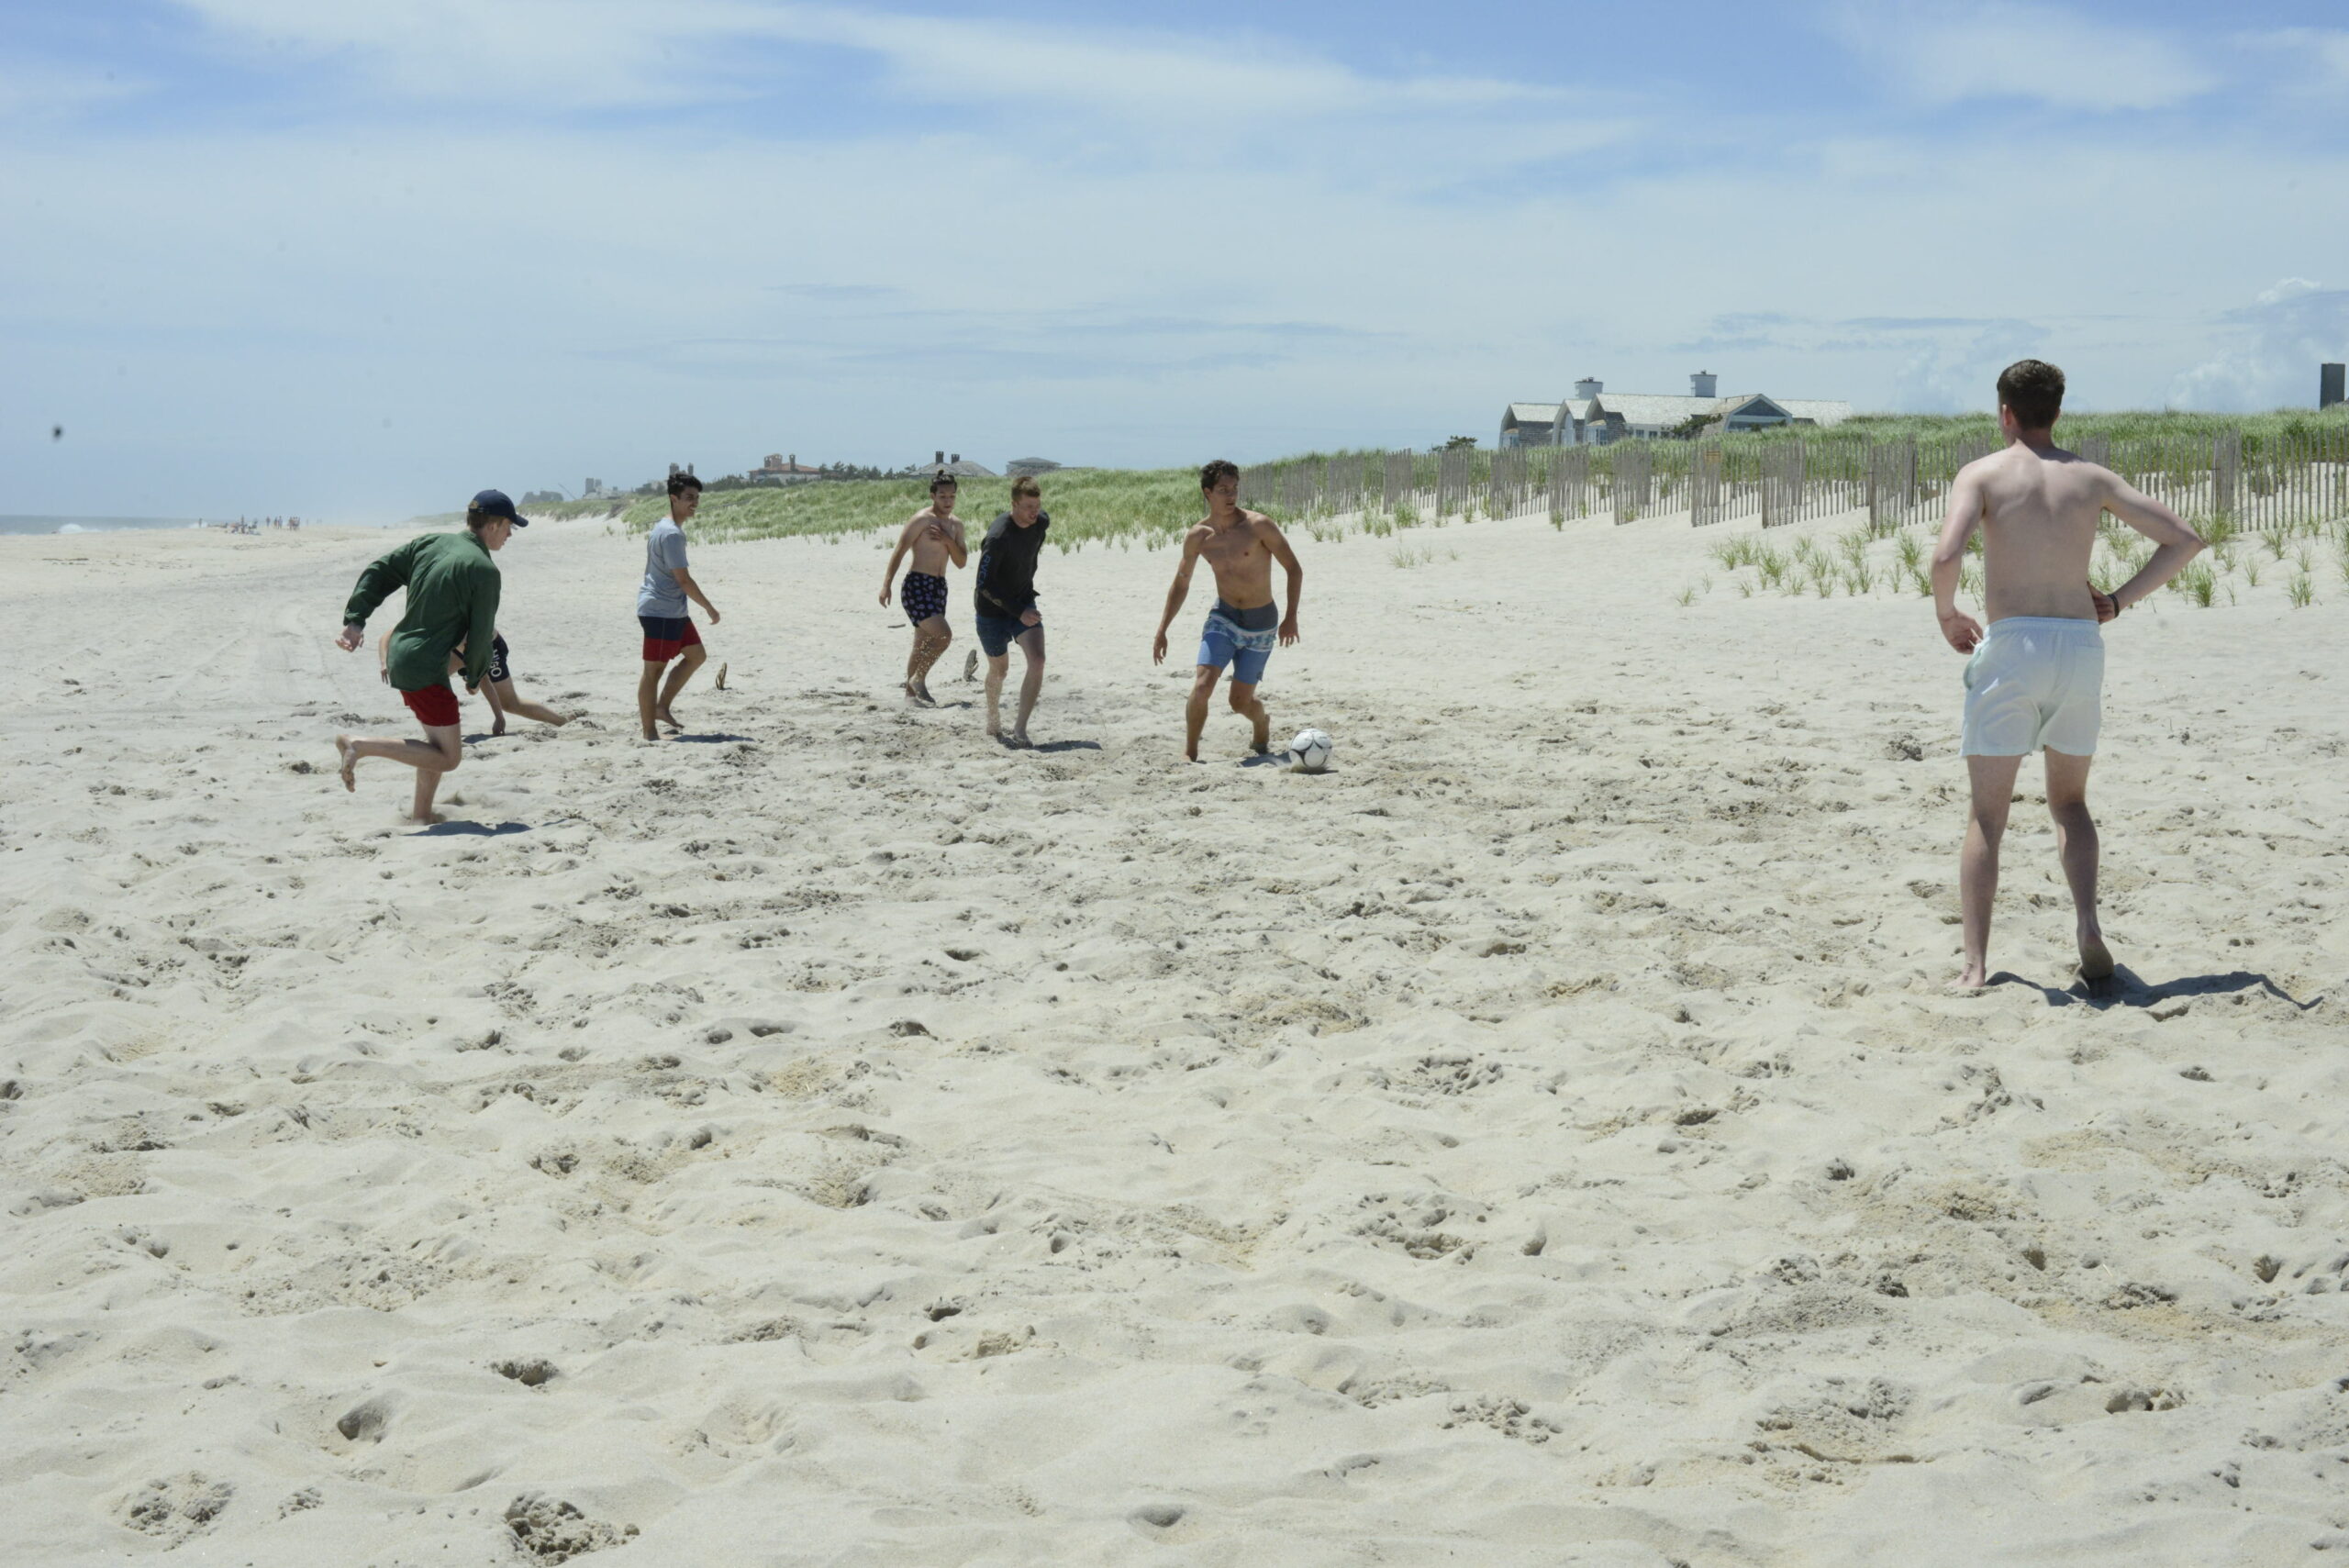 BY JULIA HEMING Seniors made friends with other beach goers during Day at the Beach and played a soccer game together.